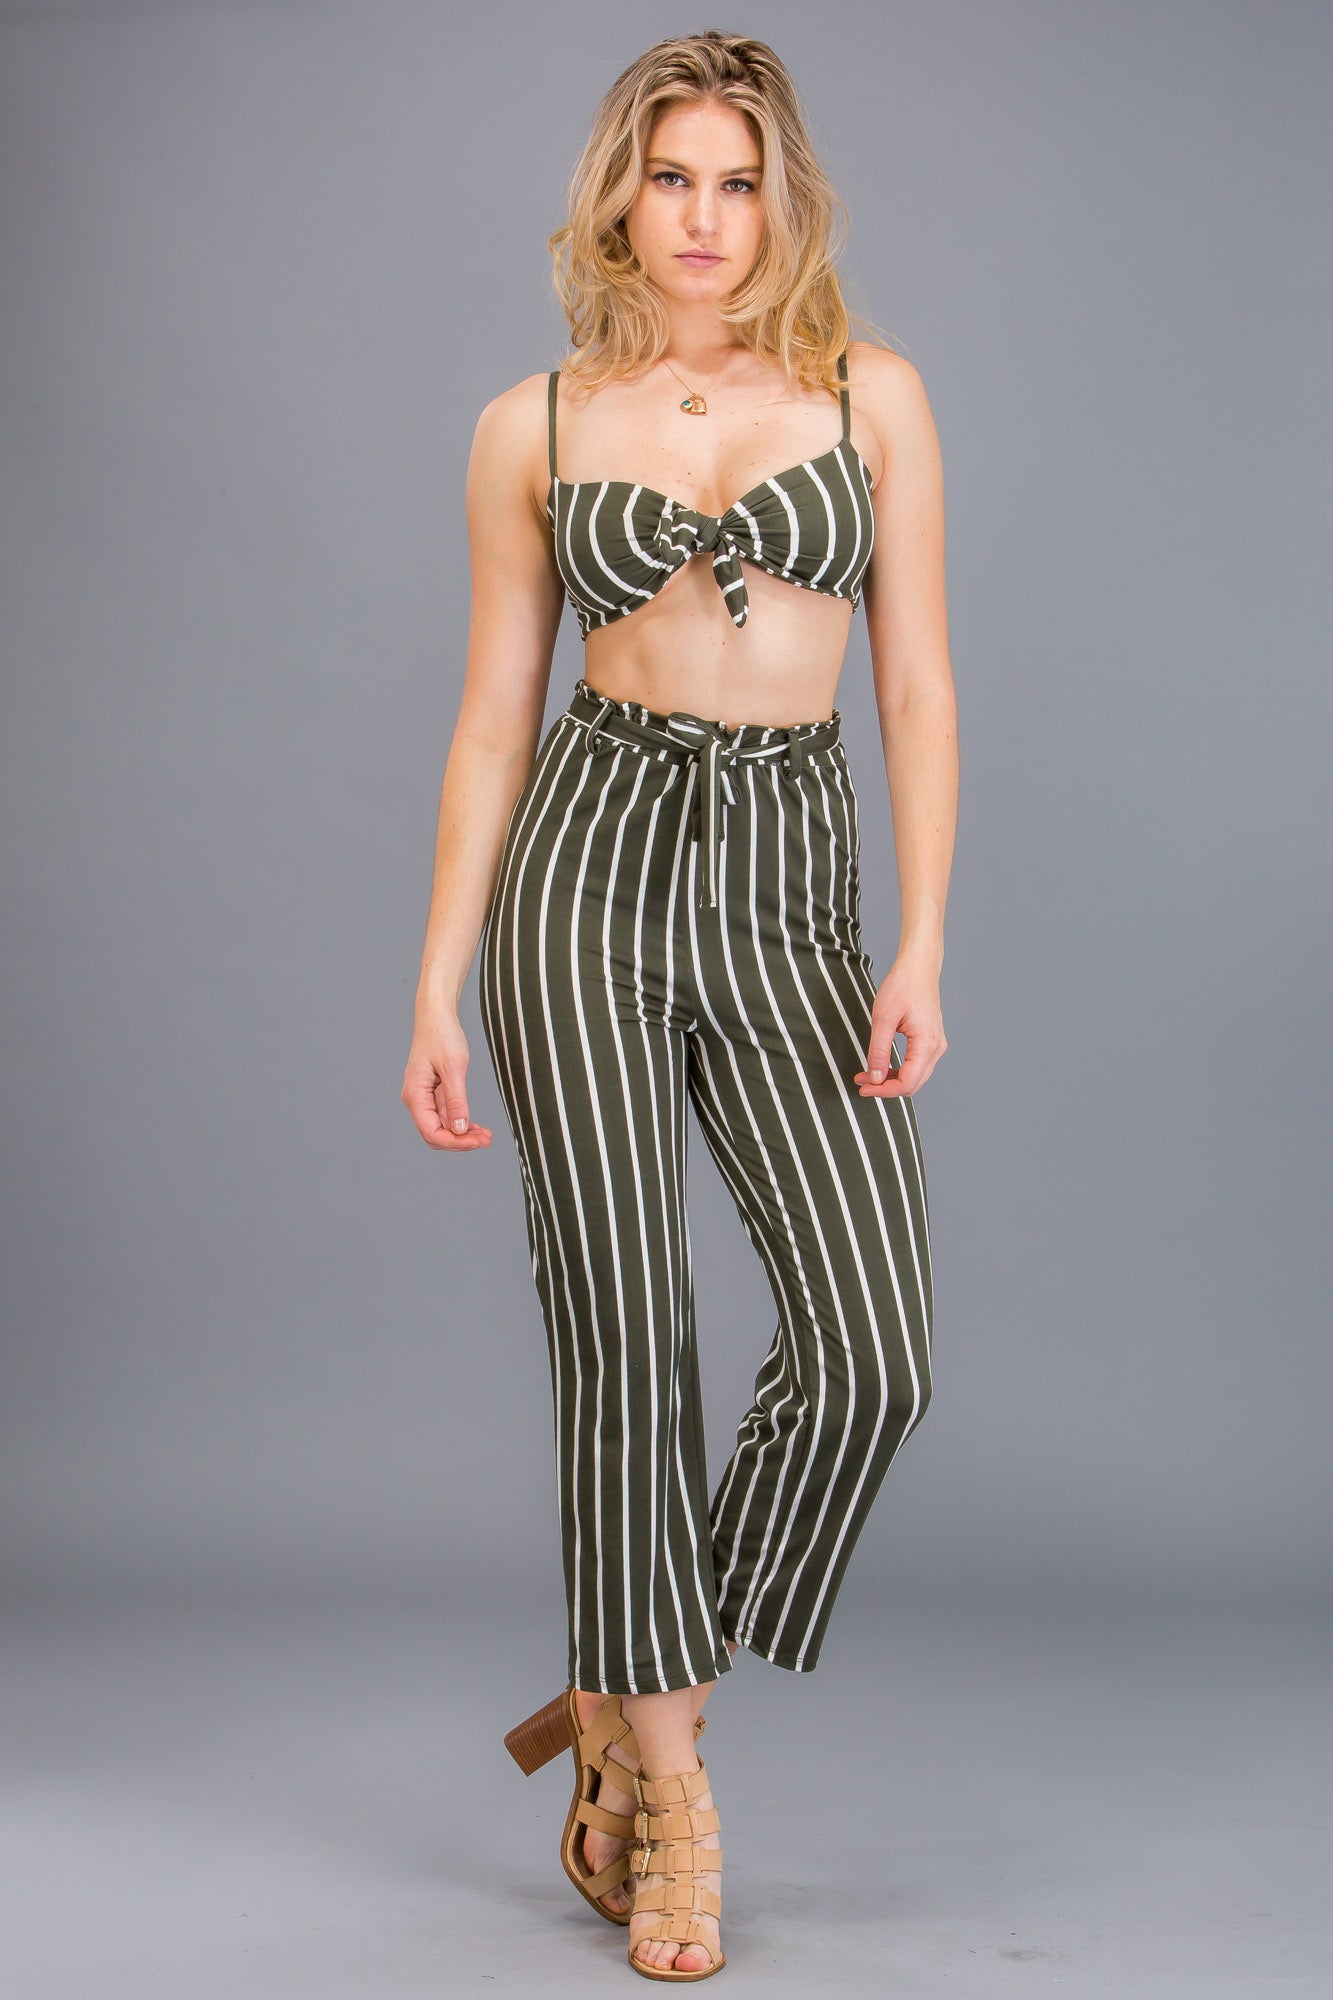 [$3/piece] Striped Front Tie Top and Pants Set